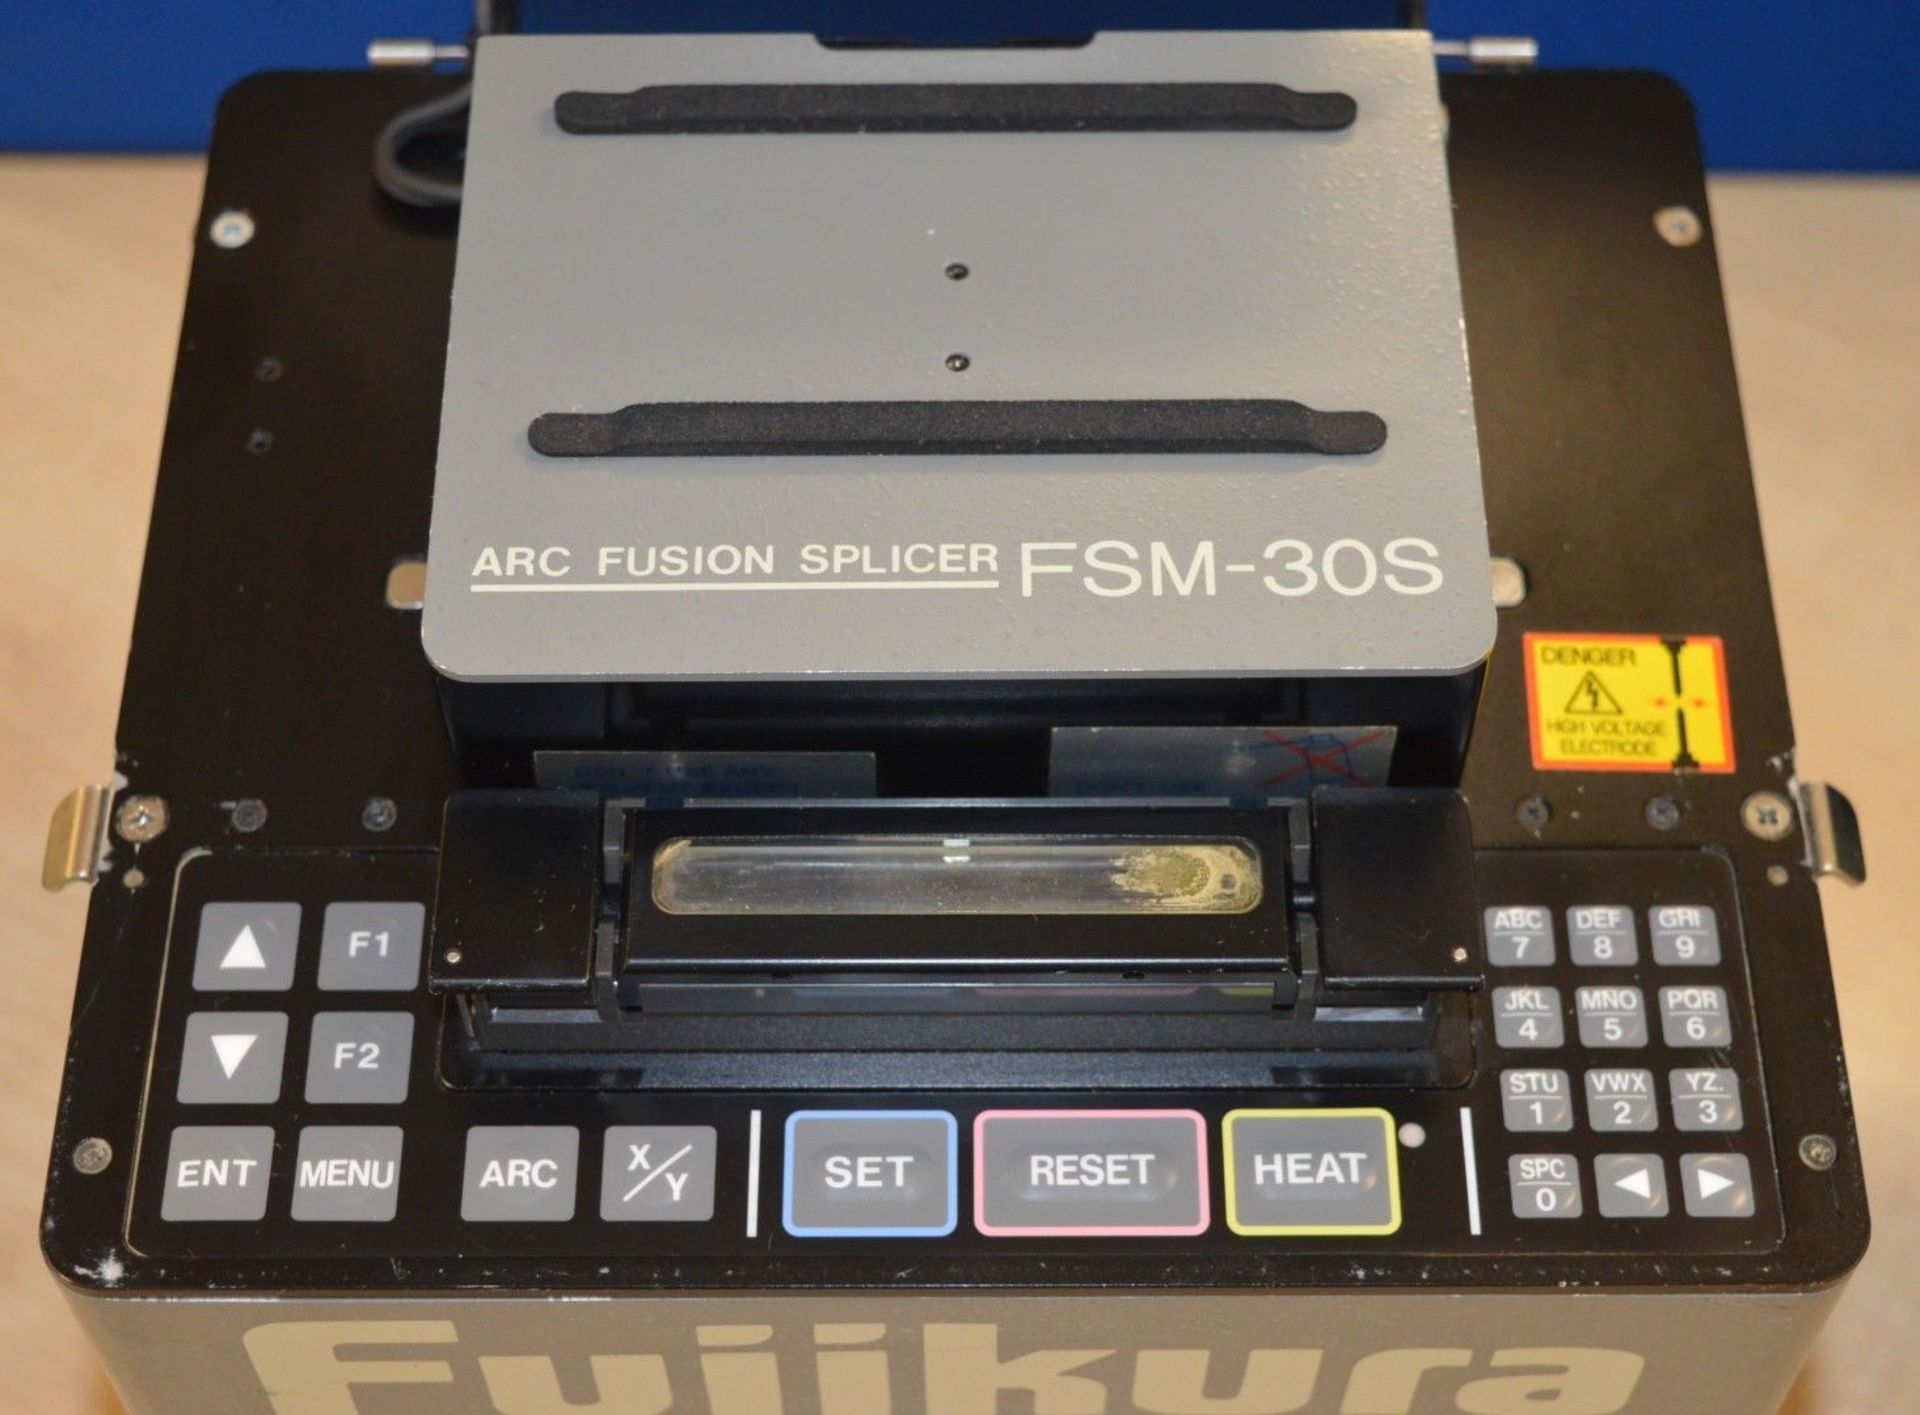 1 x Fujikura FSM-30S Arc Fusion Splicer With Carry Case - Includes Cables - Arc Count 1423 - Total - Image 2 of 10